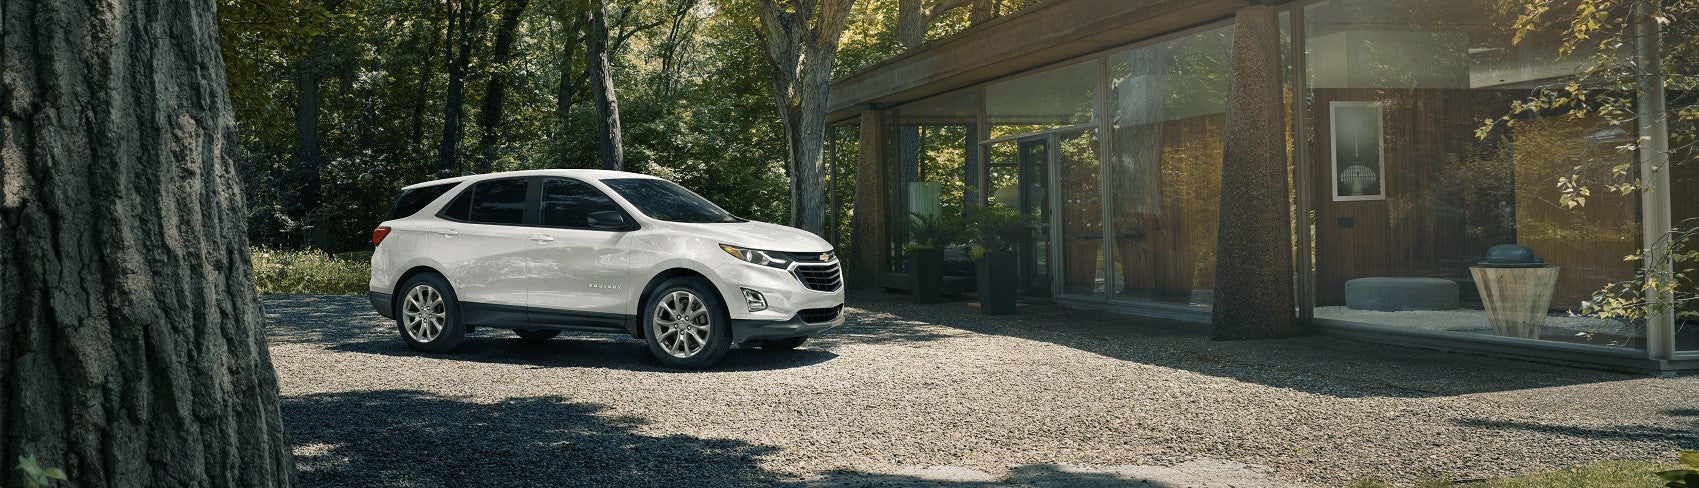 A shiny, new White Chevy Equinox is parked in sunshine outside of a stylish cabin in the woods